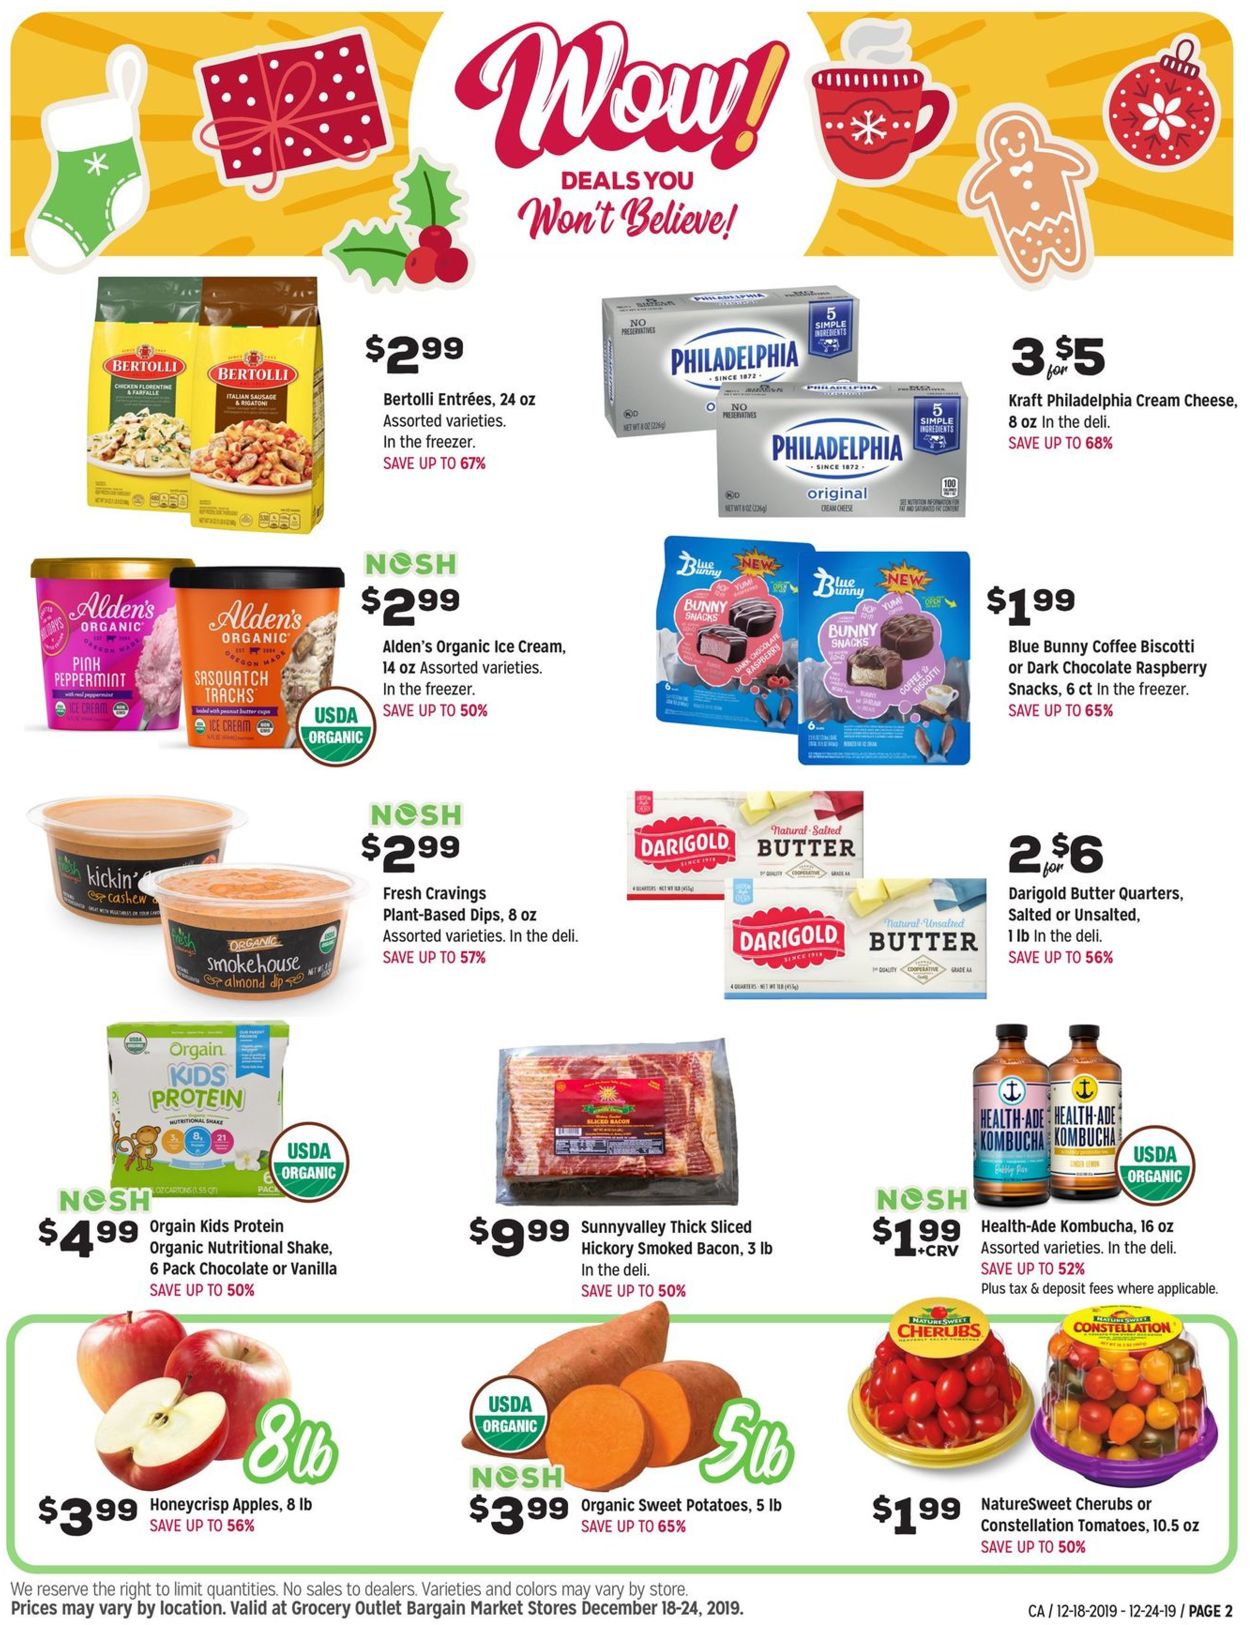 Grocery Outlet - Holiday Ad 2019 Weekly Ad Circular - valid 12/18-12/24/2019 (Page 2)